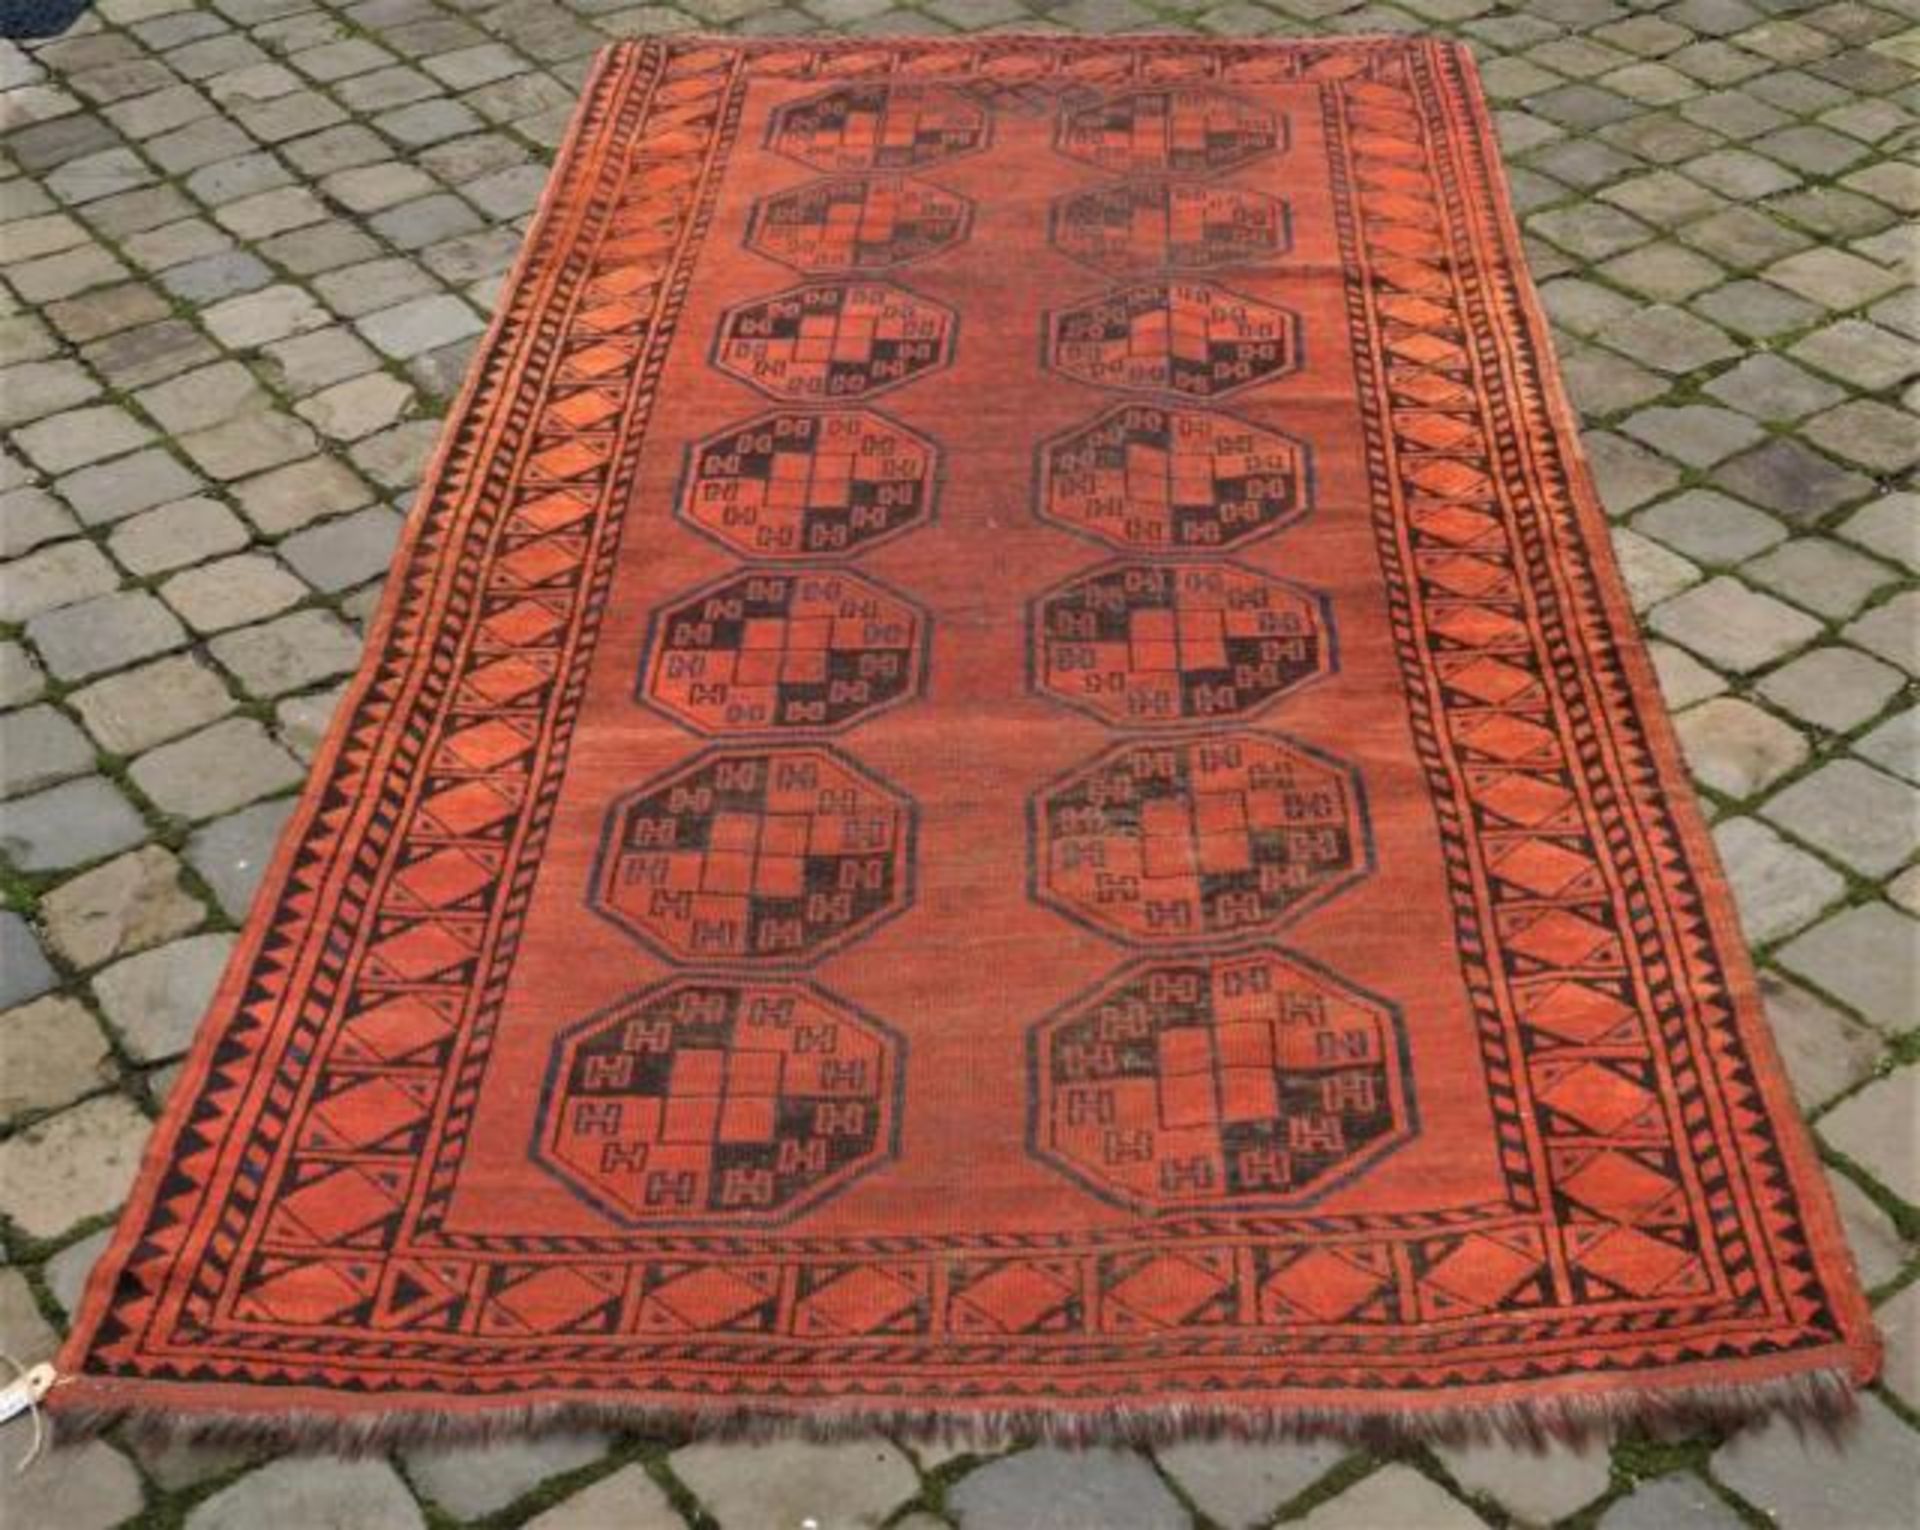 Afghan carpet, dim. 230 x 120 cm, wear and tear and some damage